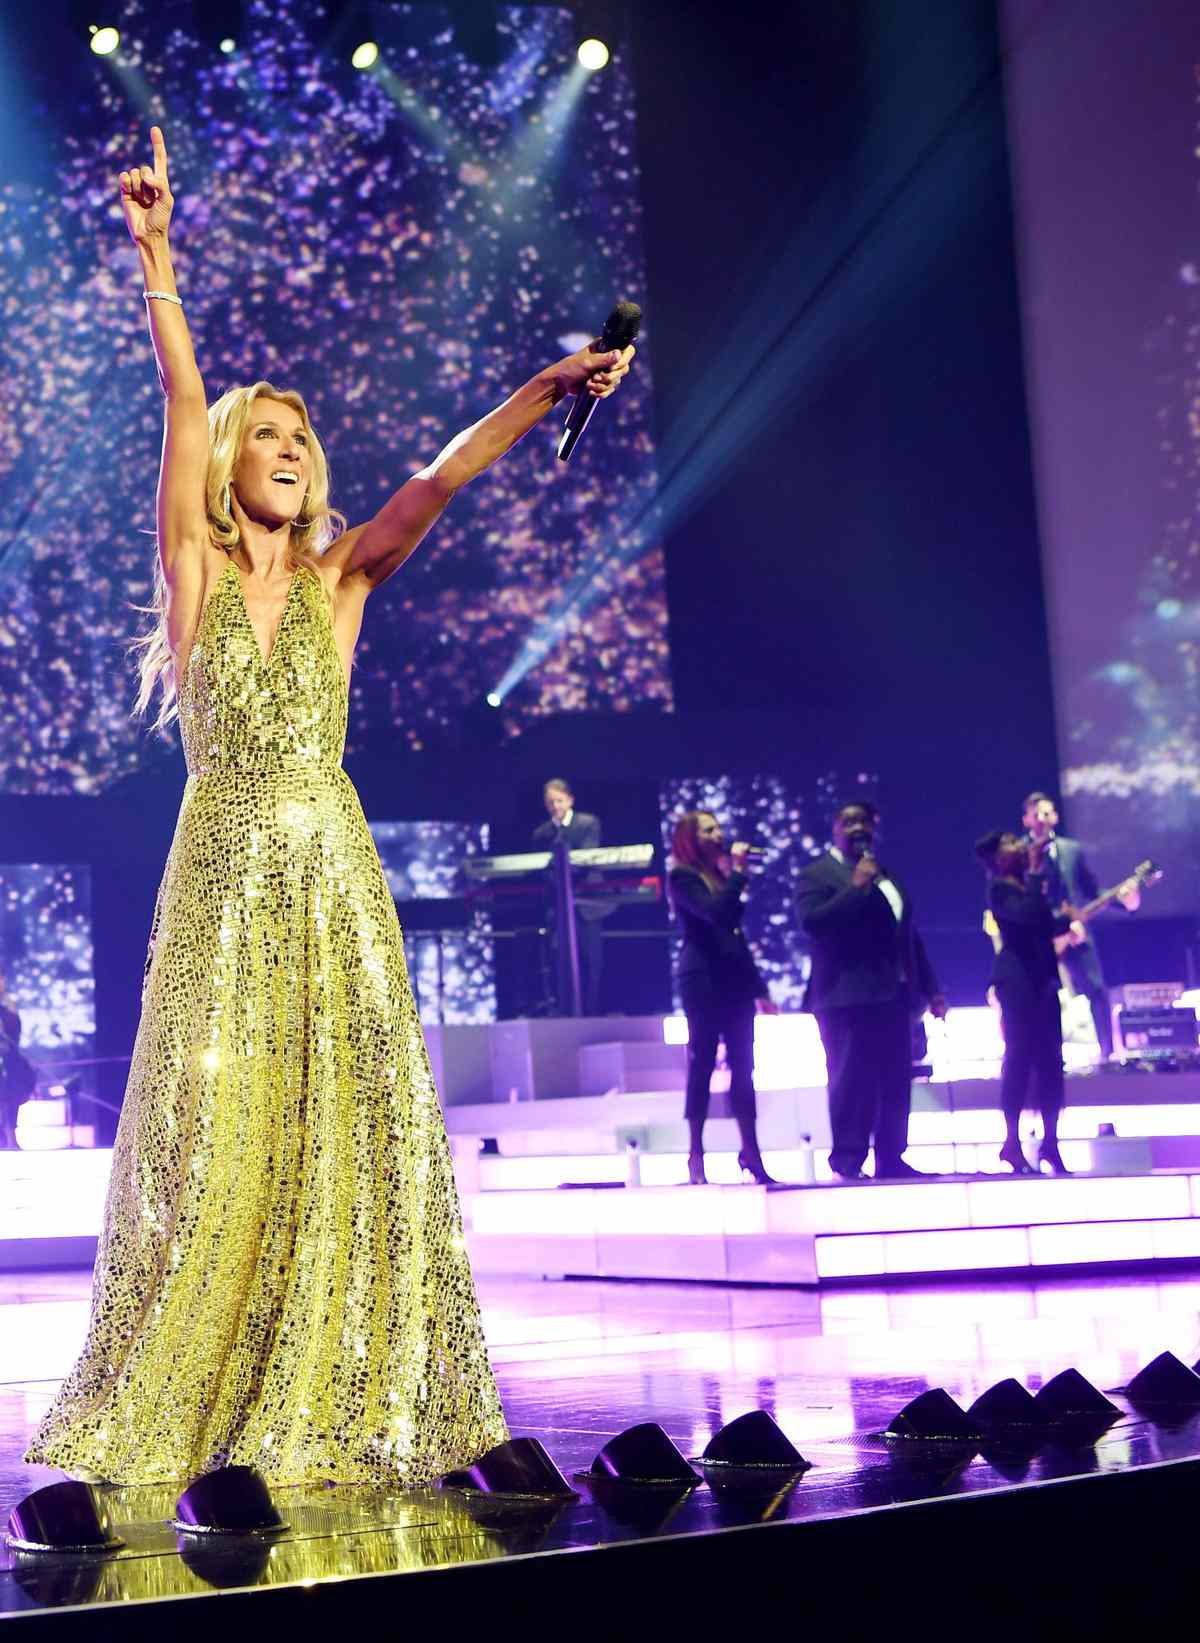 Celine Dion Performs The Final Show Of Her Las Vegas Residency At The Colosseum At Caesars Palace